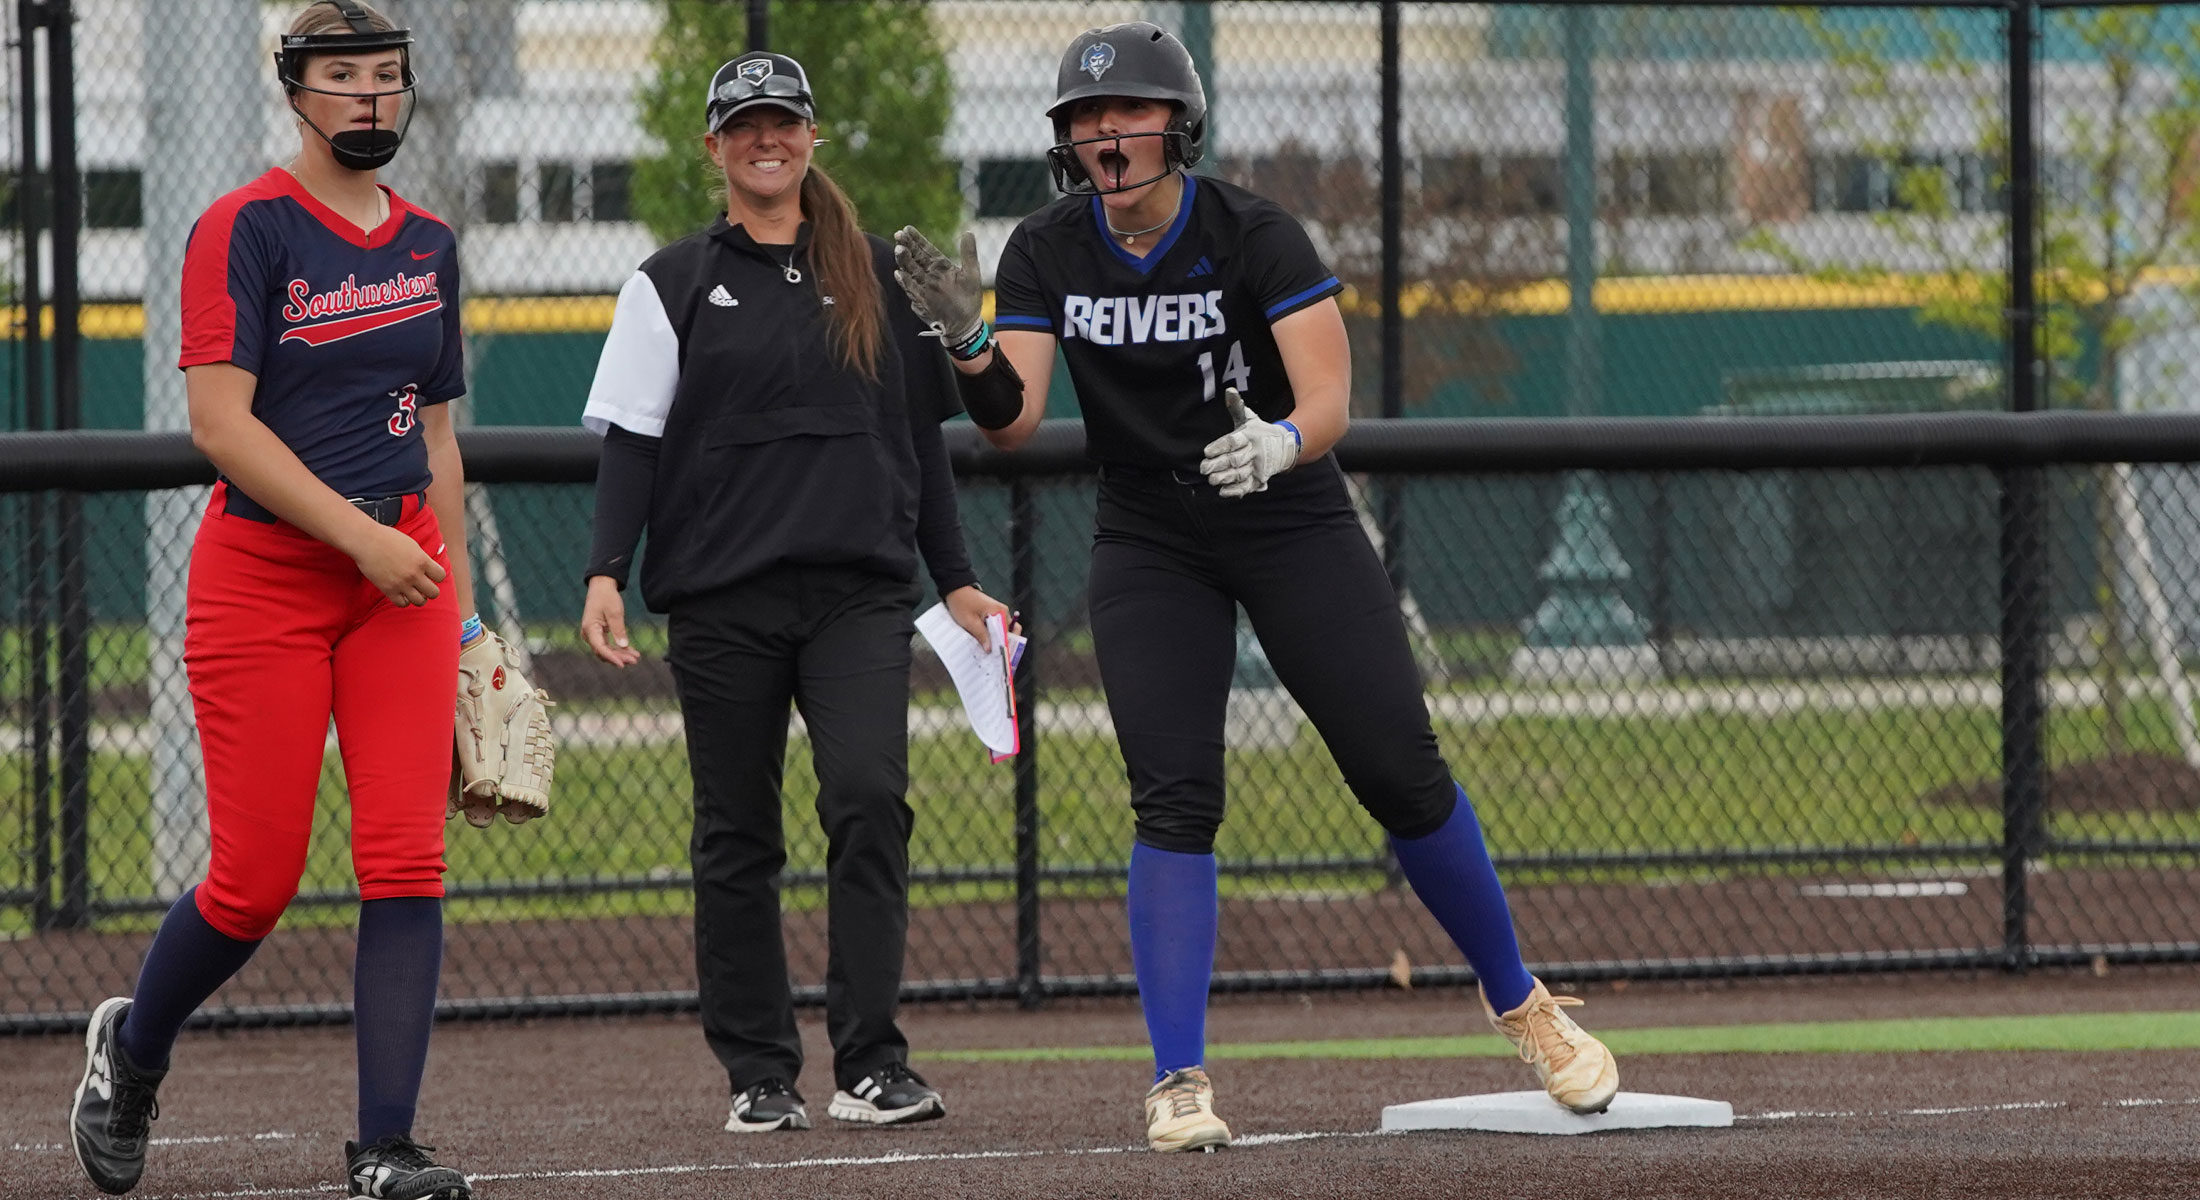 Reivers Sweep Southwestern; Advance to ICCAC Finals